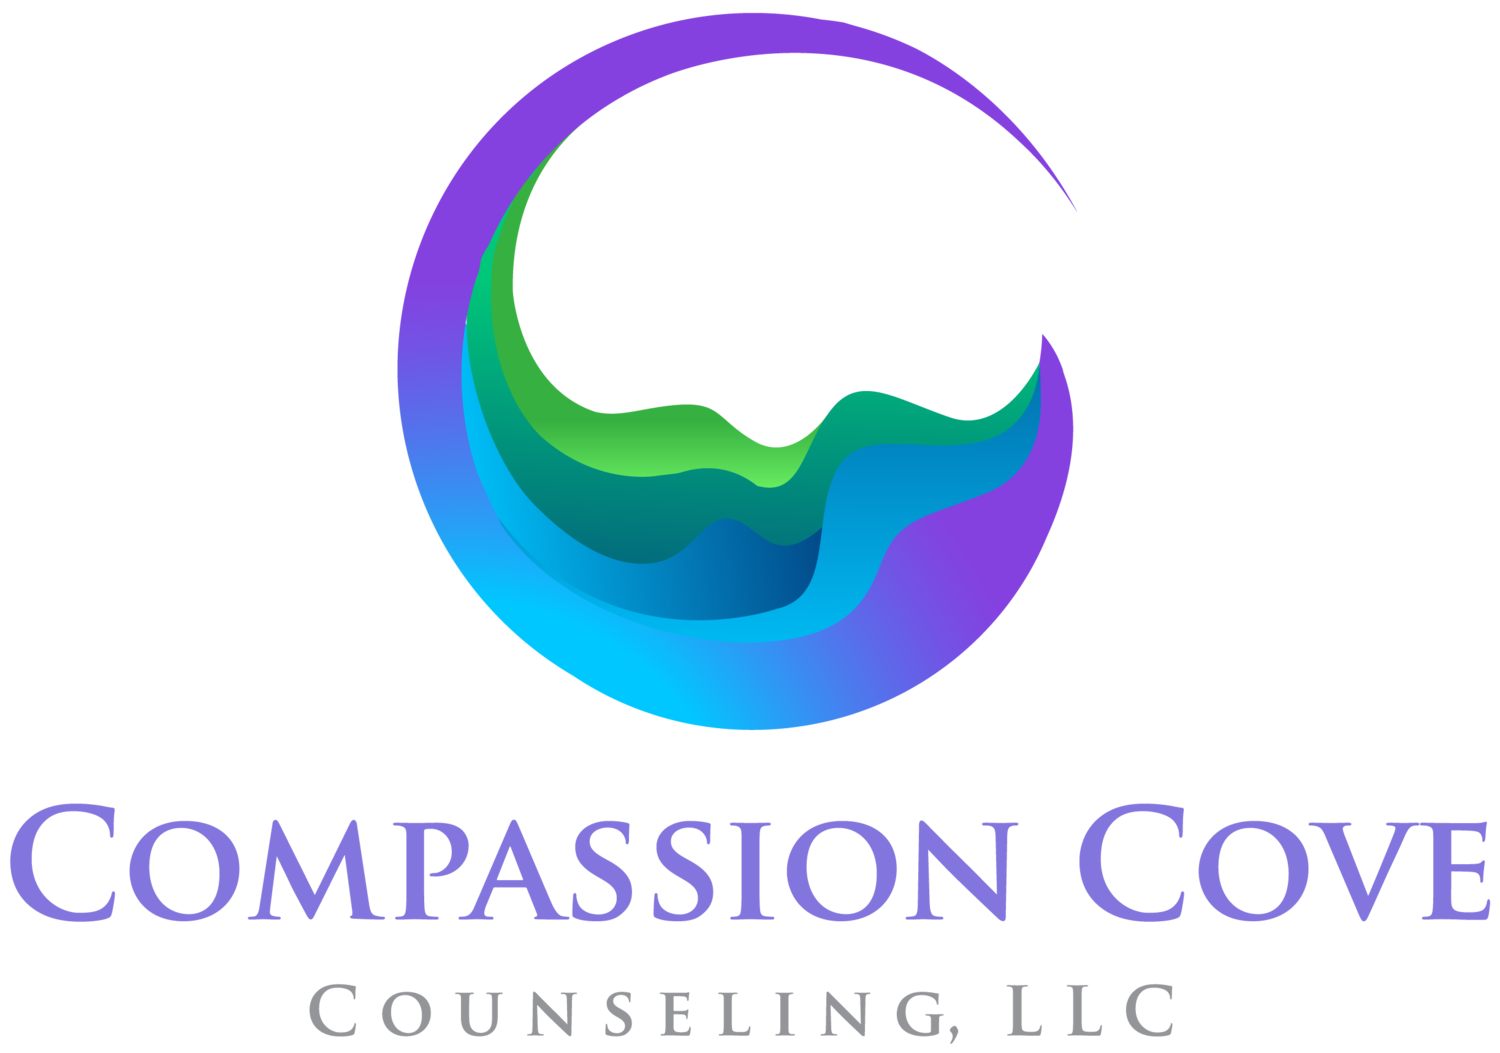 Compassion Cove Counseling